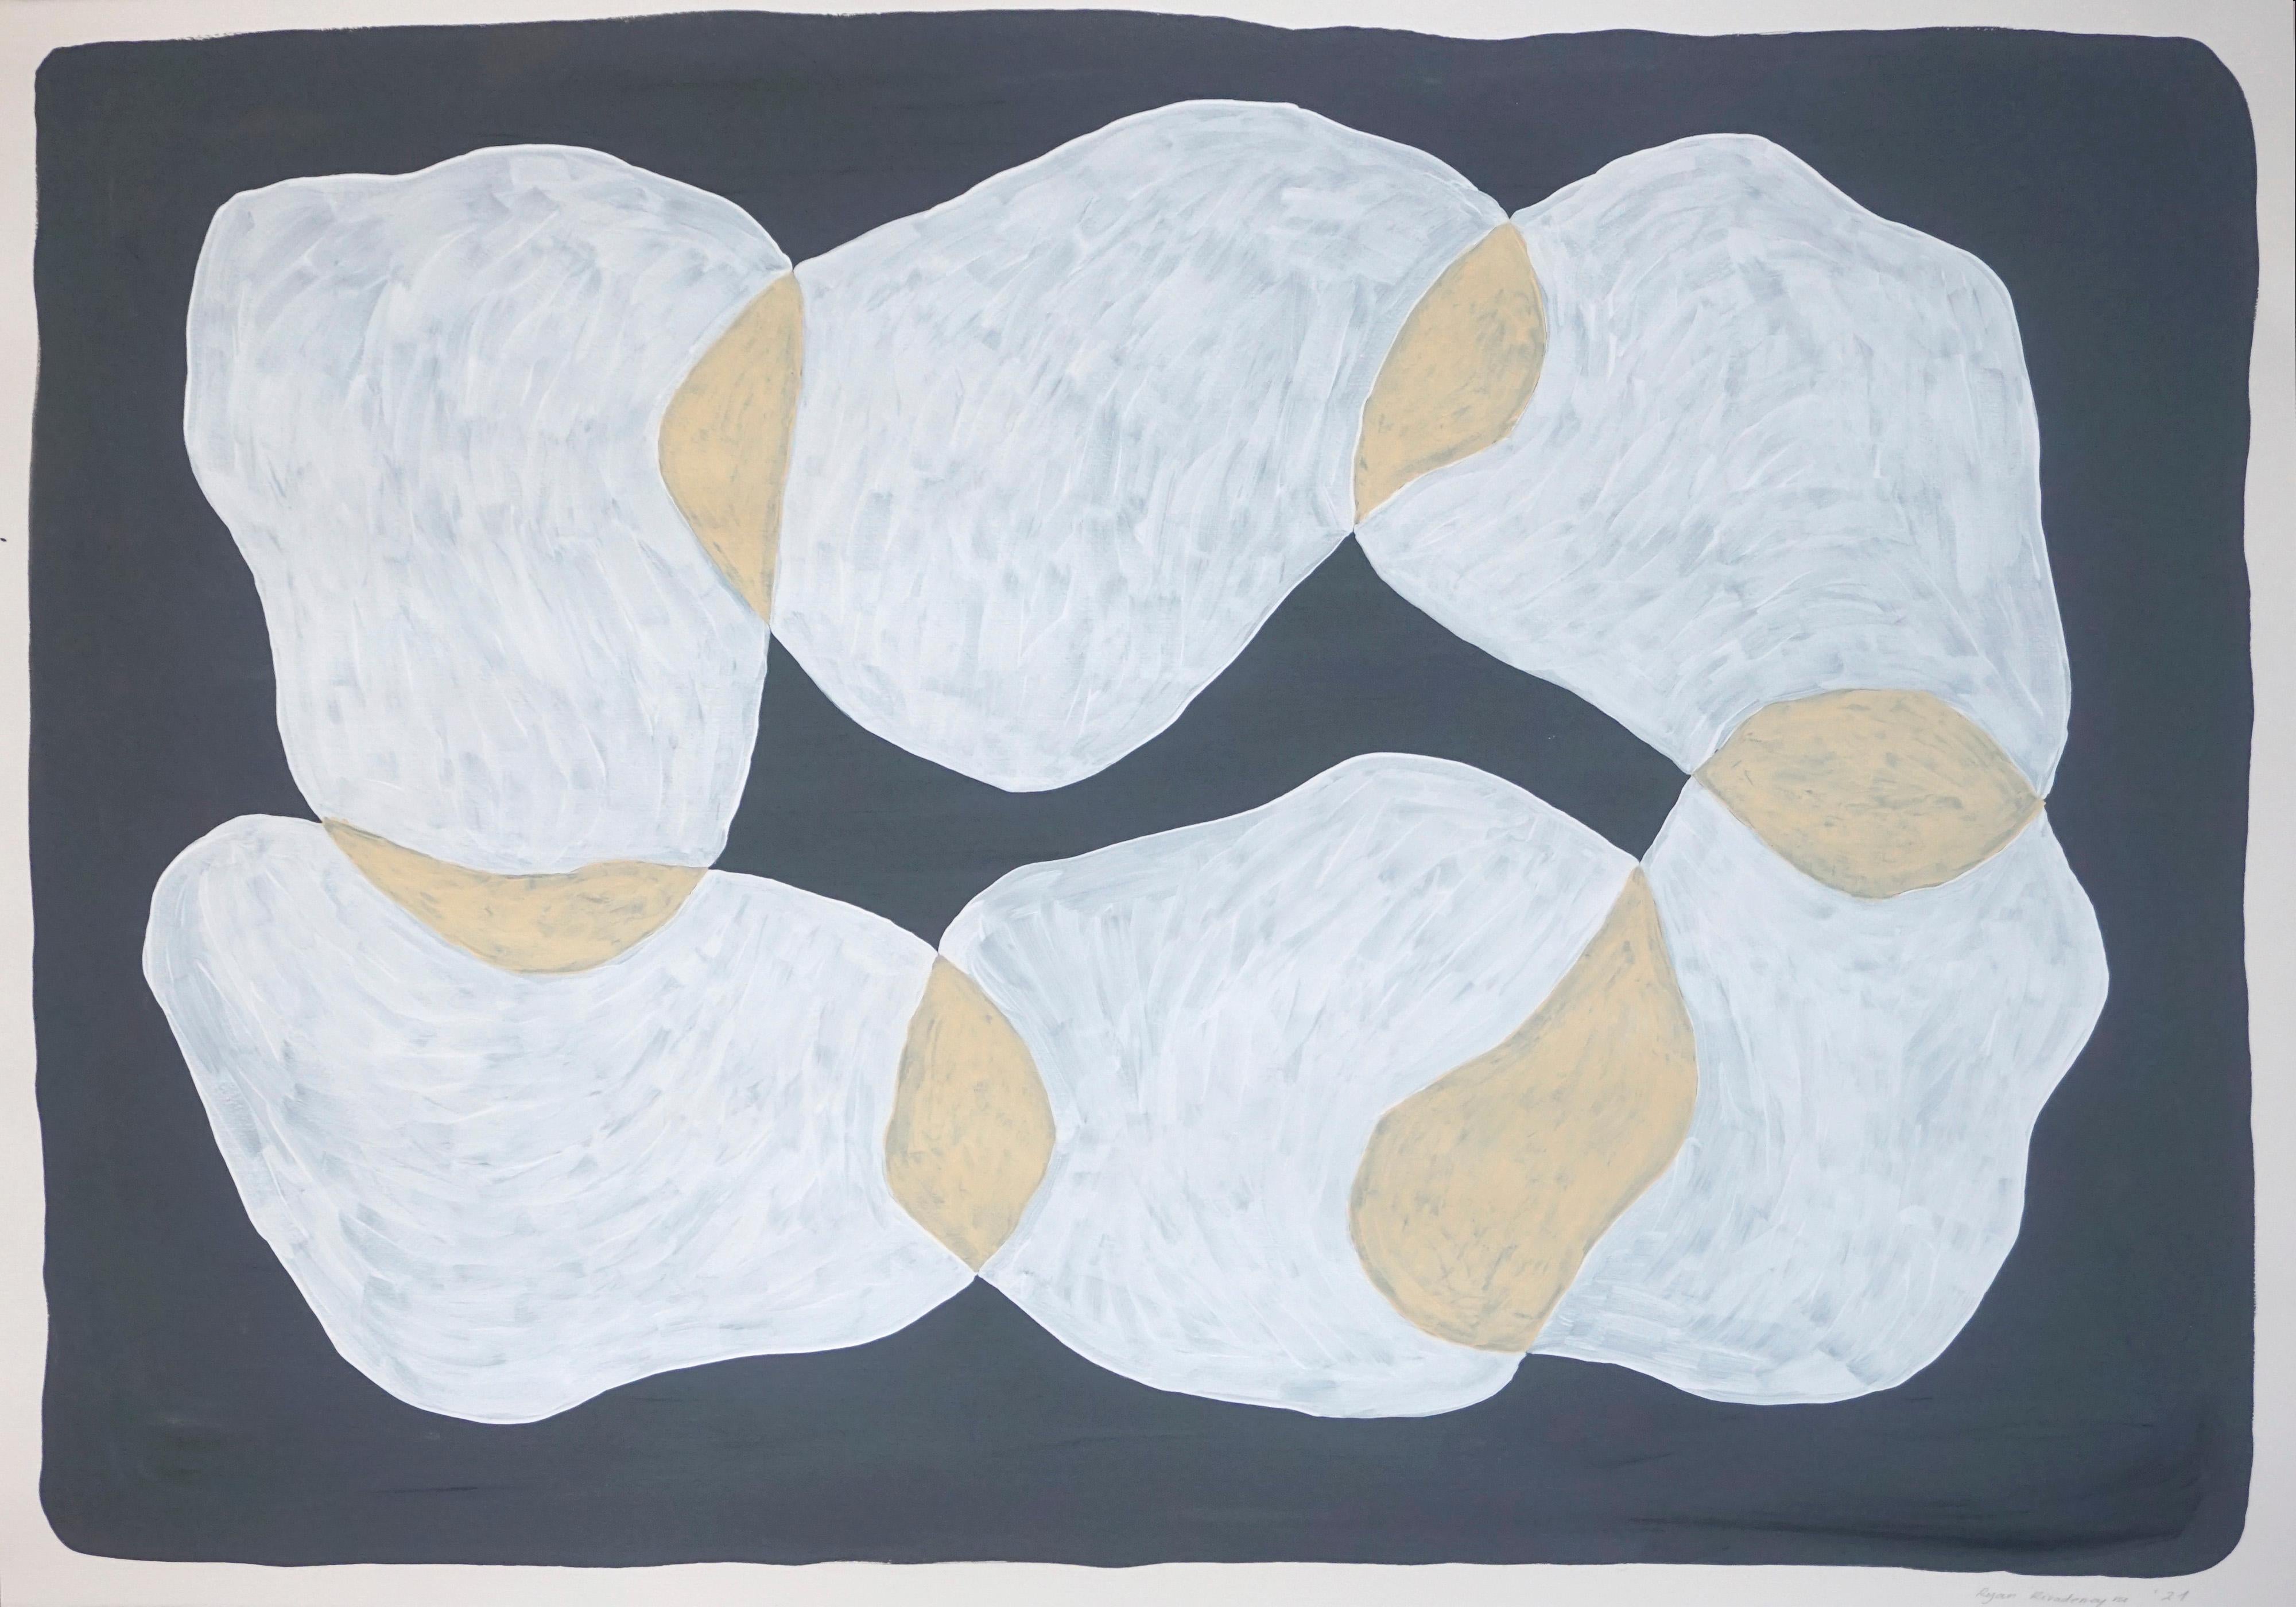 Ryan Rivadeneyra Abstract Painting - Pale Tones of Translucent Shadow Circles, Mid-Century Shapes in Black and White